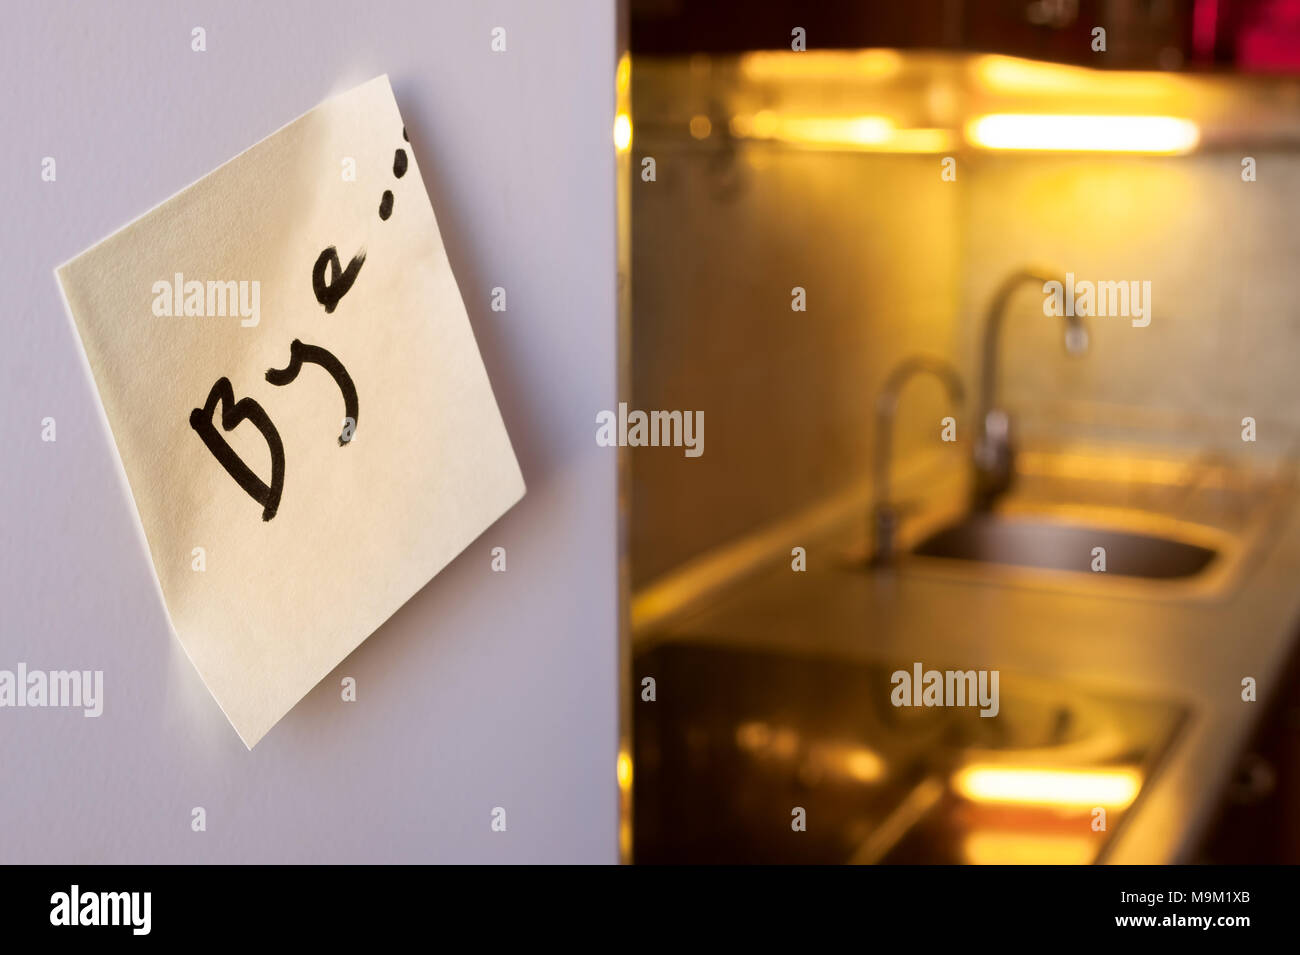 End of relationship concept: a goodbye note on a refrigerator with kitchen appliances and yellow lights in blurred background Stock Photo